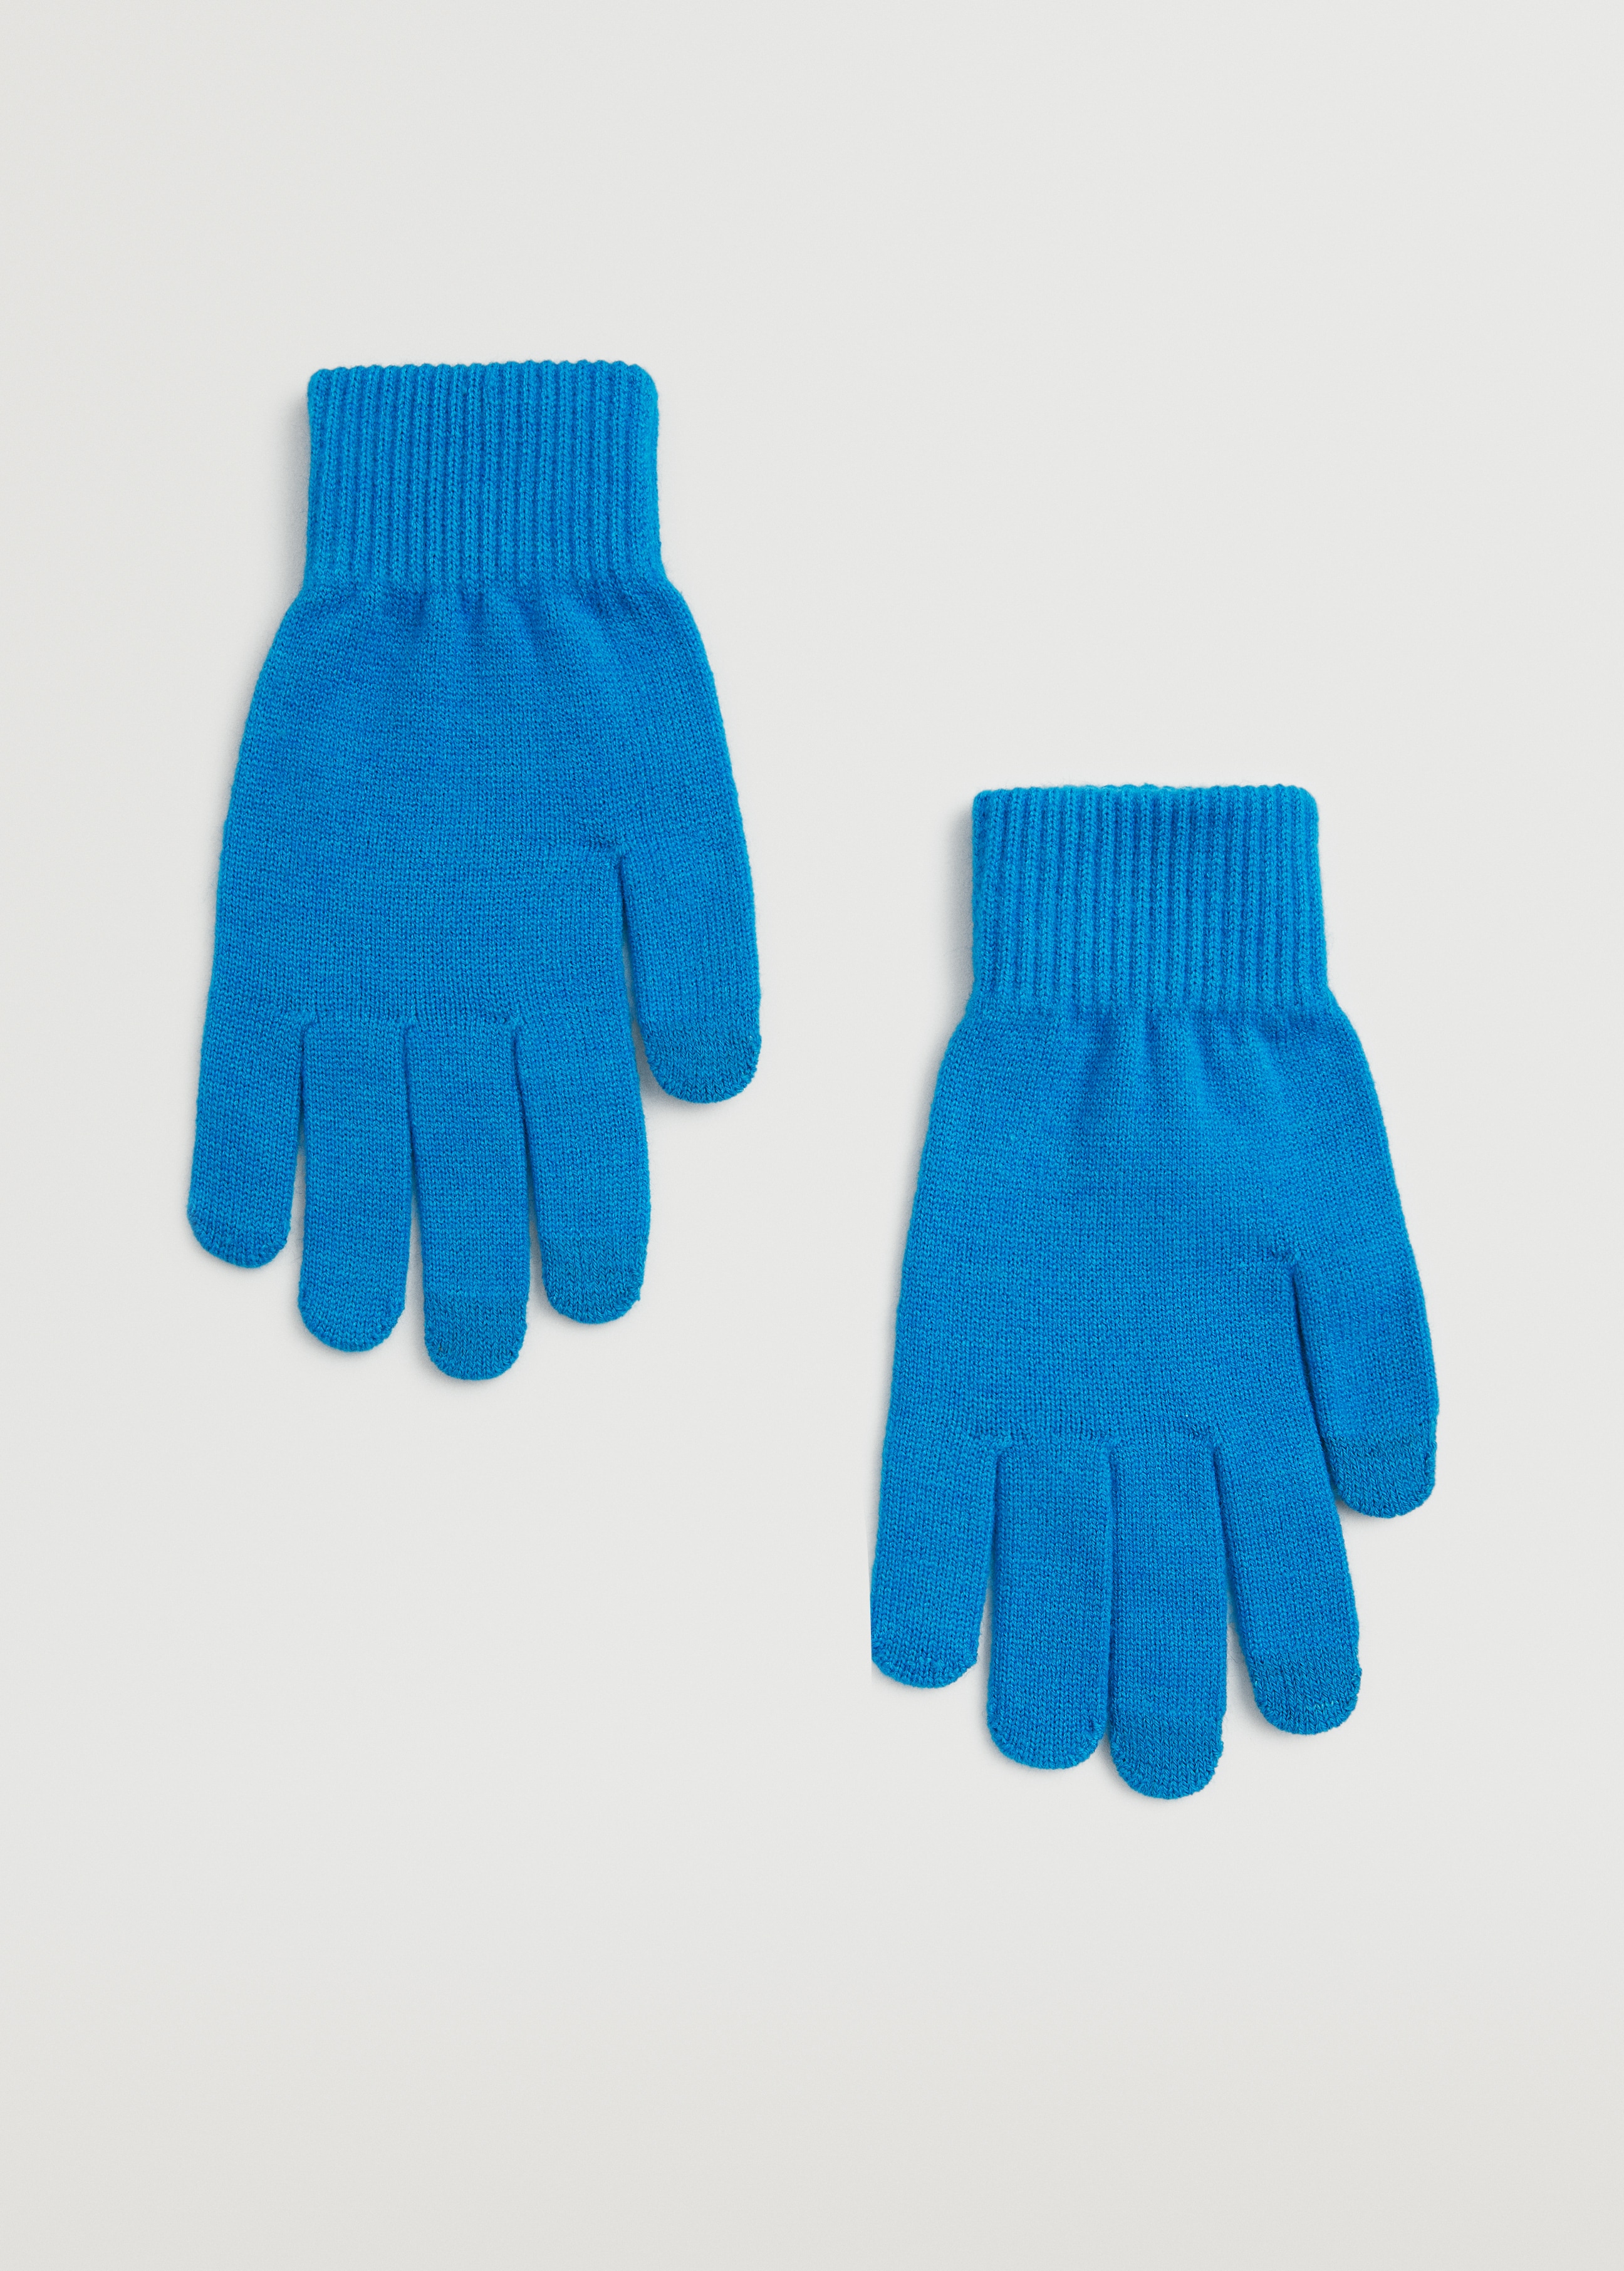 Ribbed knit gloves - Article without model